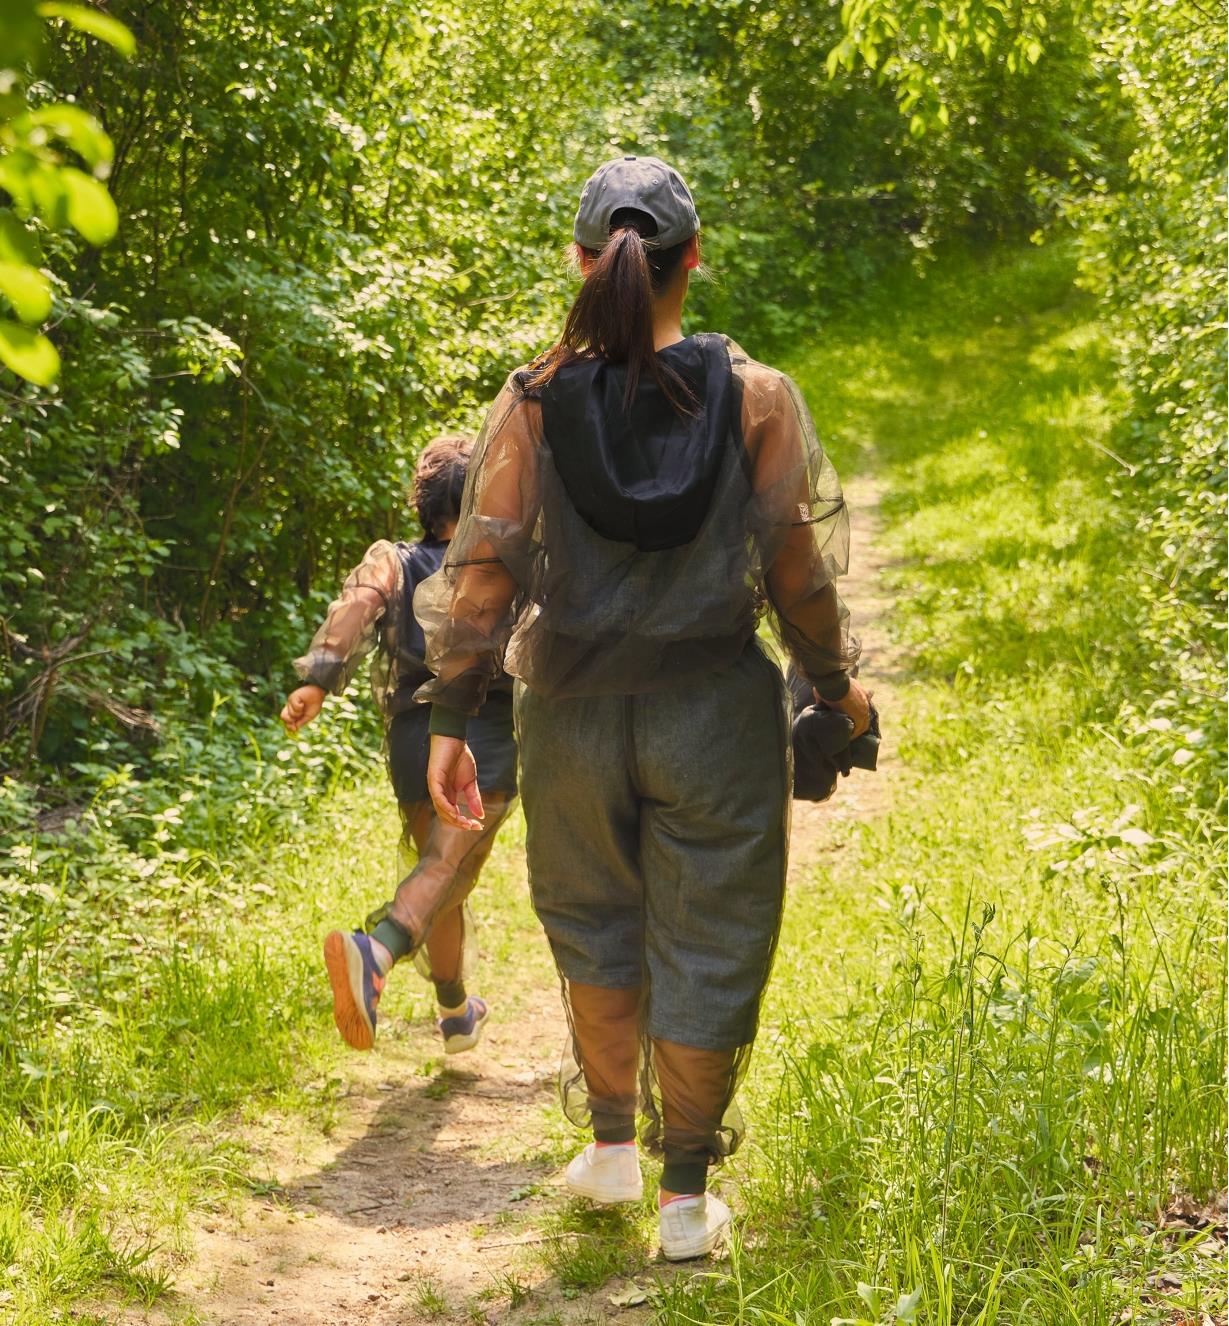 A rear view of a woman and a child wearing bug-protection clothing on a hiking trail